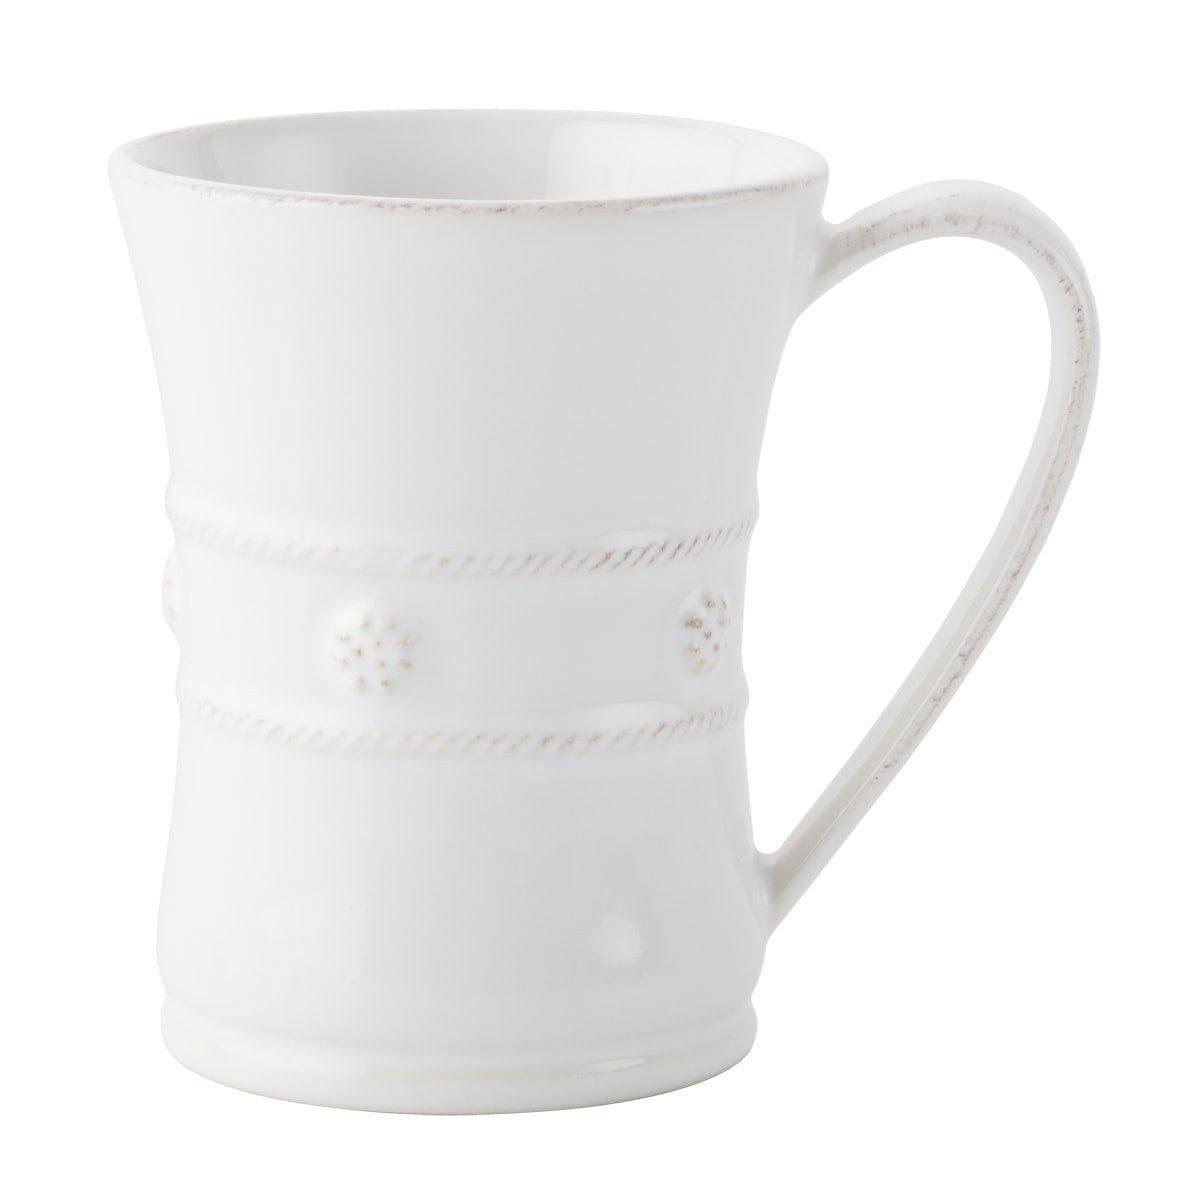 berry and thread mug on a white background